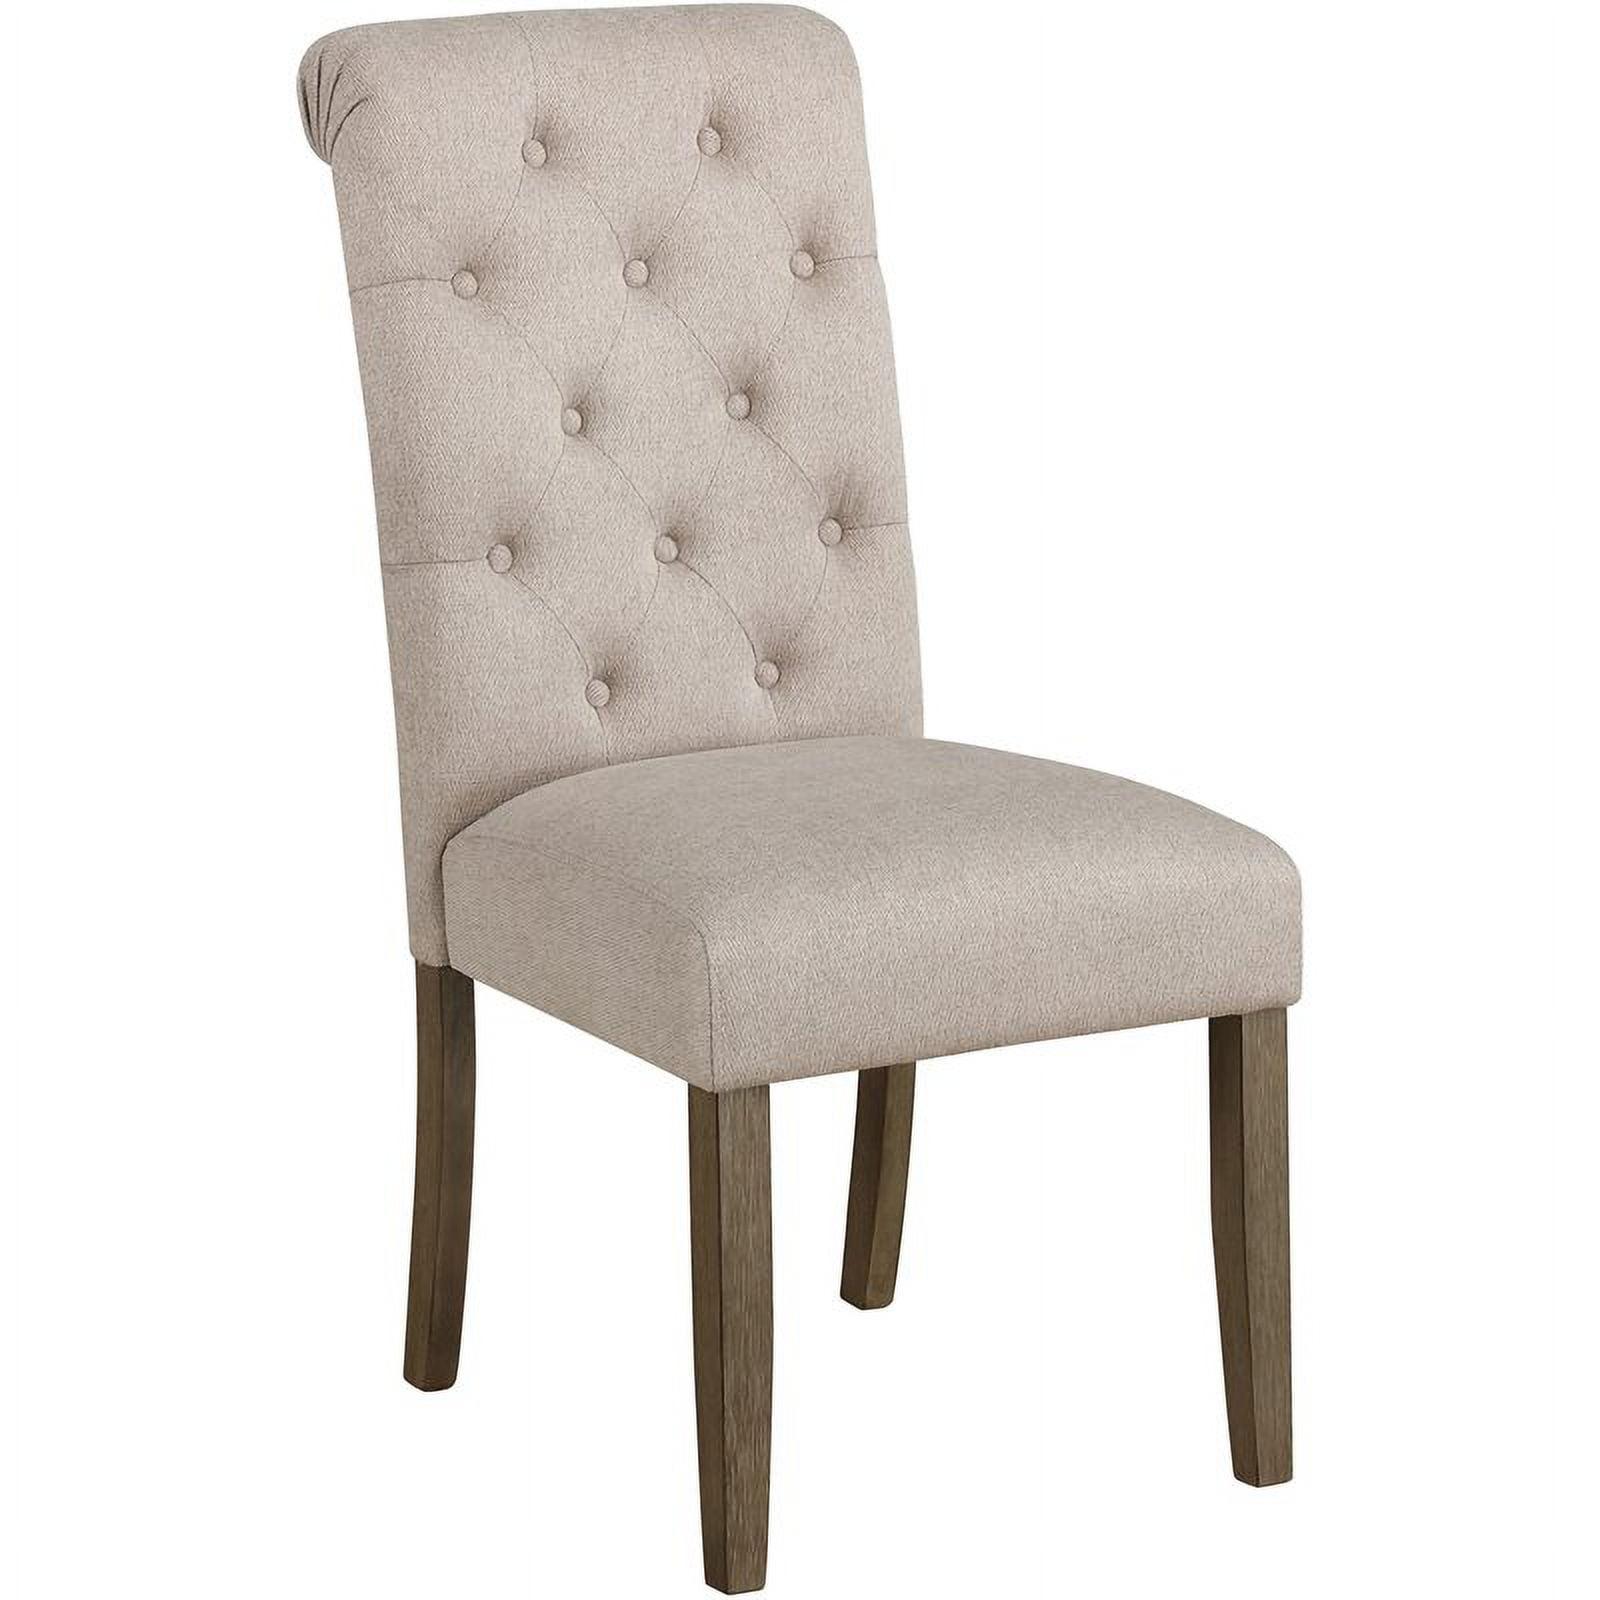 Elegant Beige Upholstered Parsons Side Chair with Rustic Wood Legs